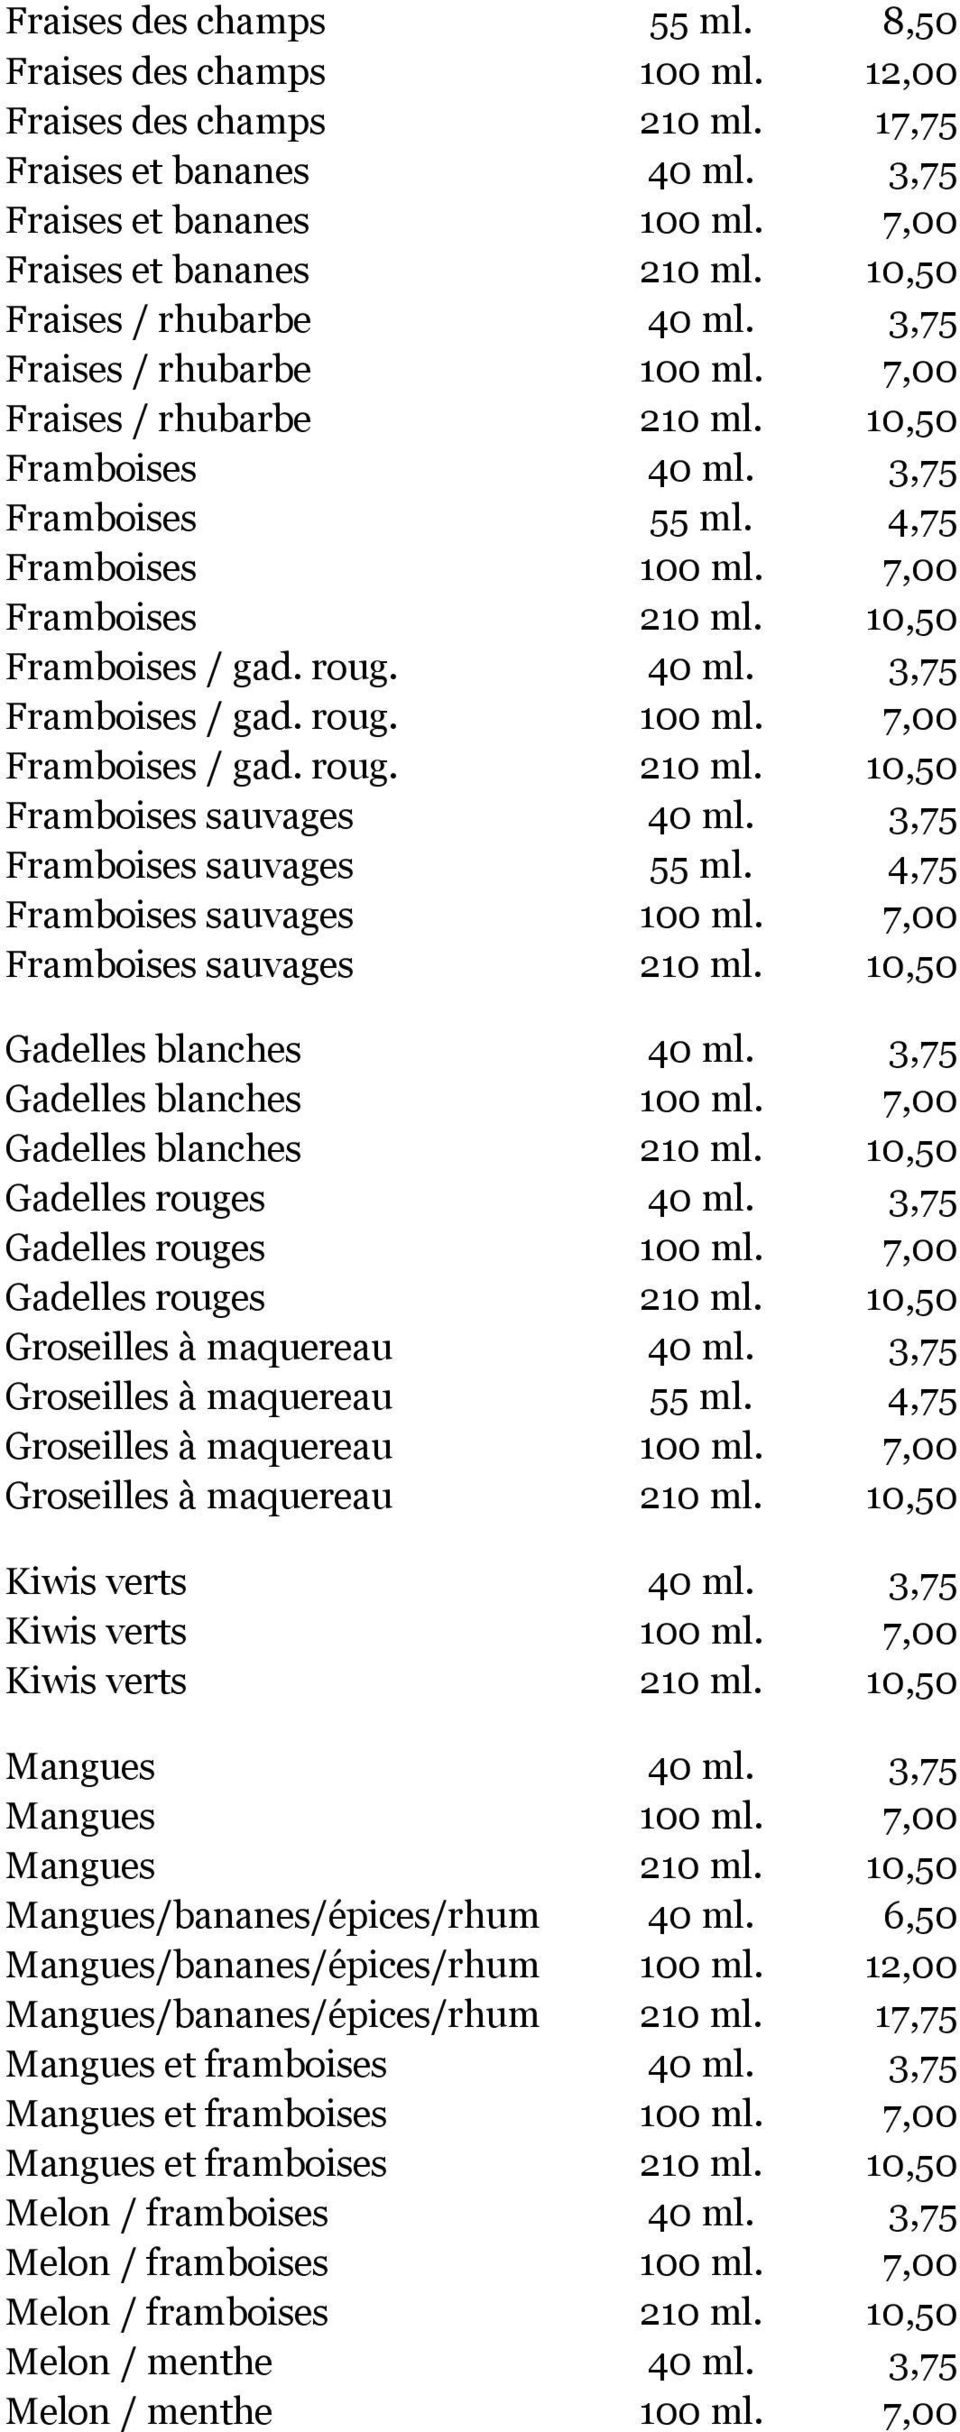 10,50 Framboises / gad. roug. 40 ml. 3,75 Framboises / gad. roug. 100 ml. 7,00 Framboises / gad. roug. 210 ml. 10,50 Framboises sauvages 40 ml. 3,75 Framboises sauvages 55 ml.